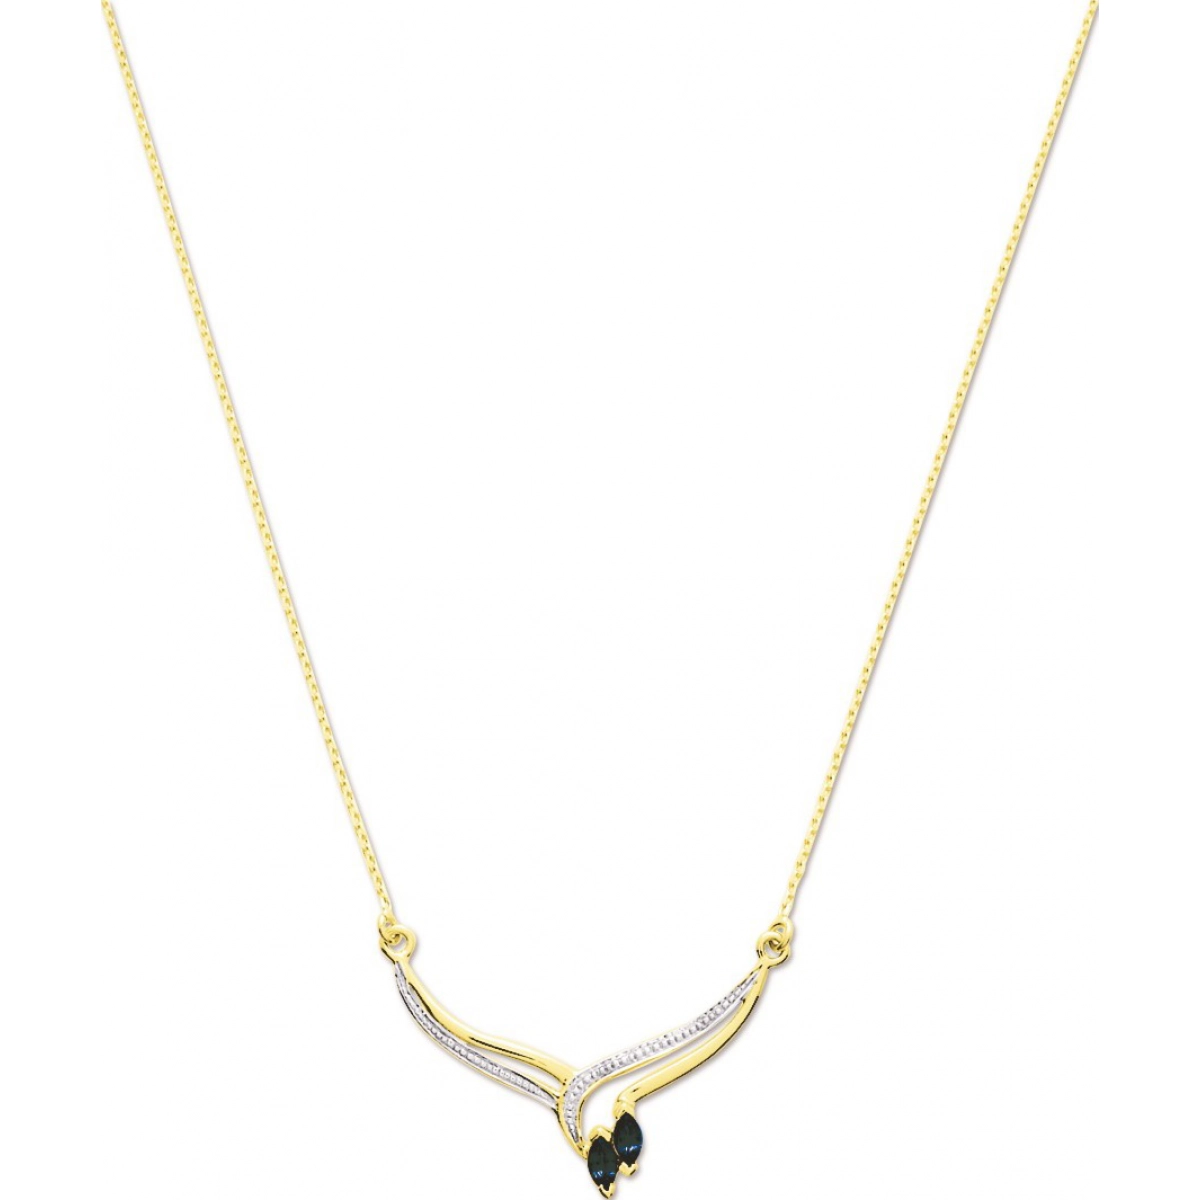 Necklace w. sapphire and rhod 9K YG - Size: 42  Lua Blanca  394018.S3.42